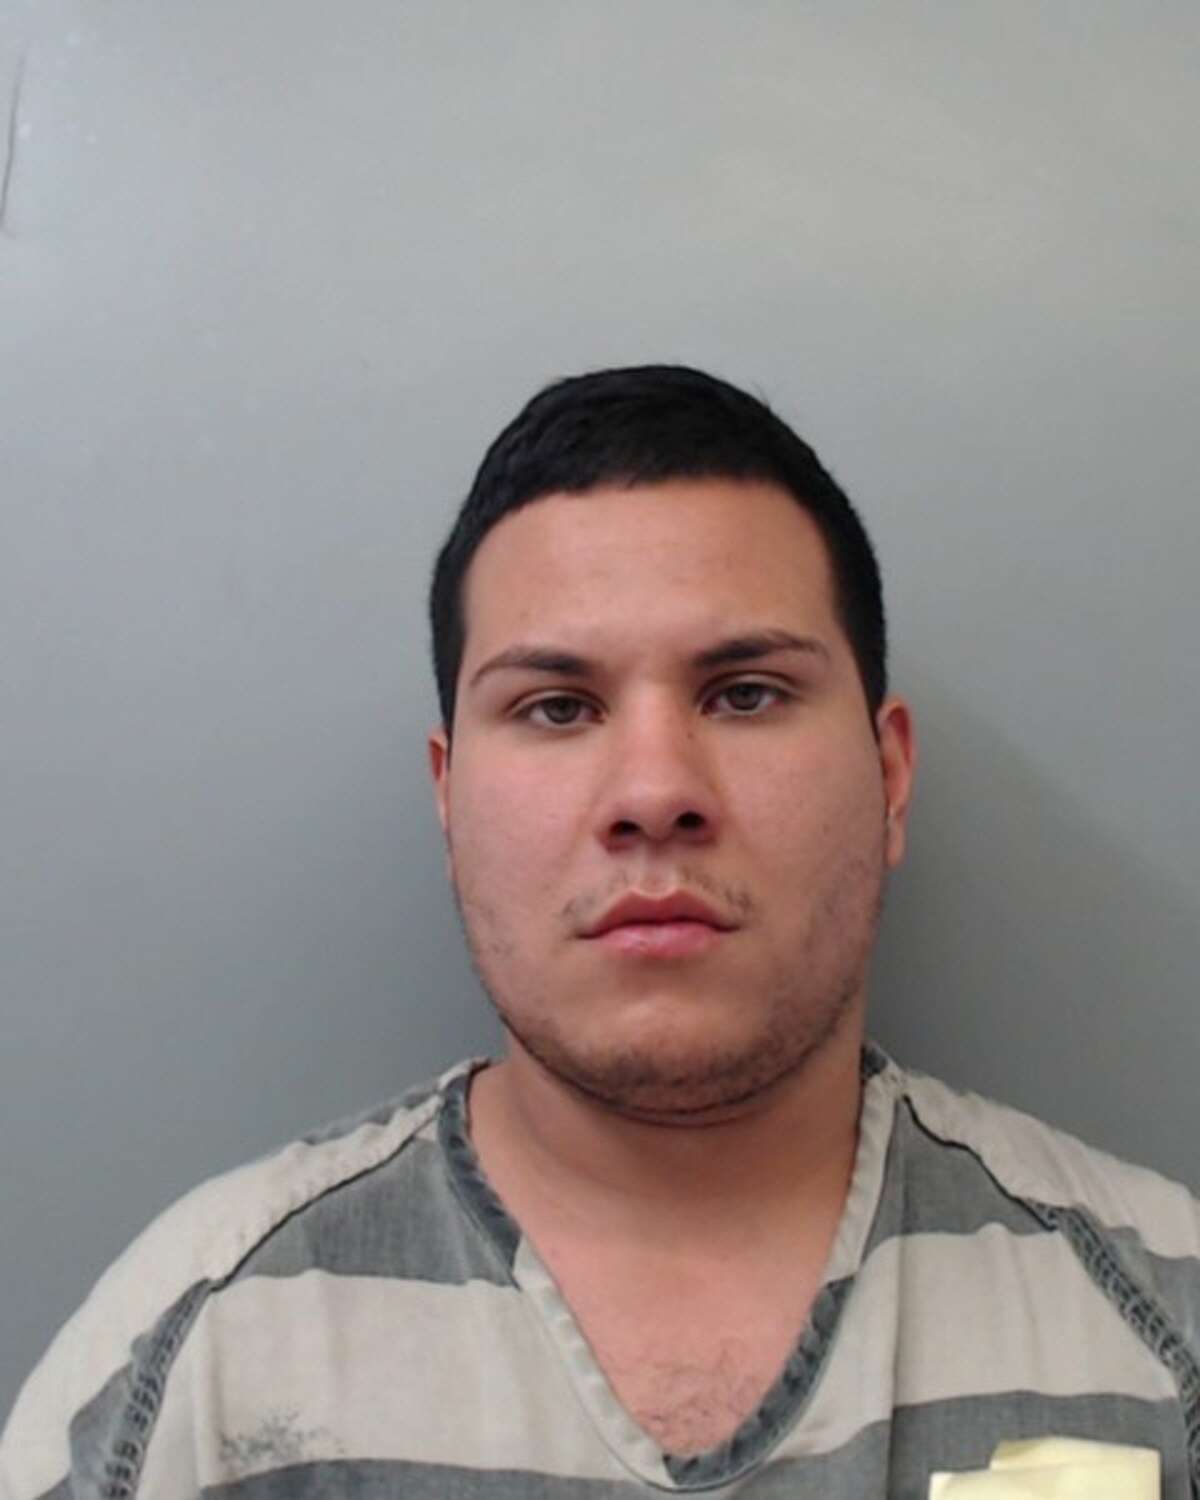 Alfredo Menchaca, 24, was charged with theft and evading arrest.